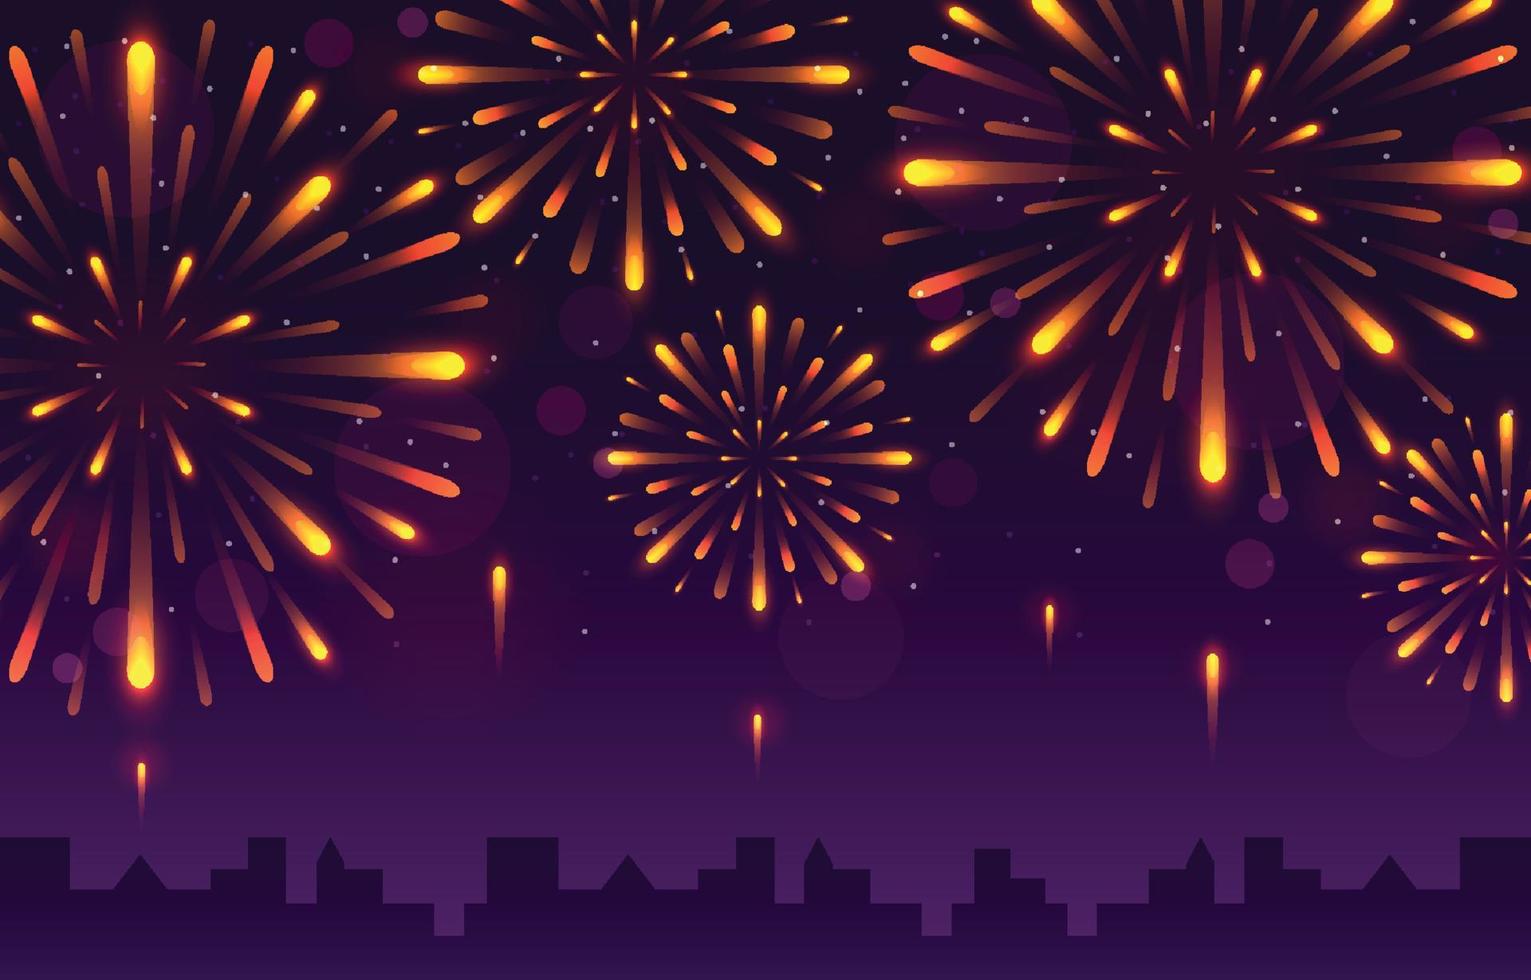 Fireworks Party at Night Background vector